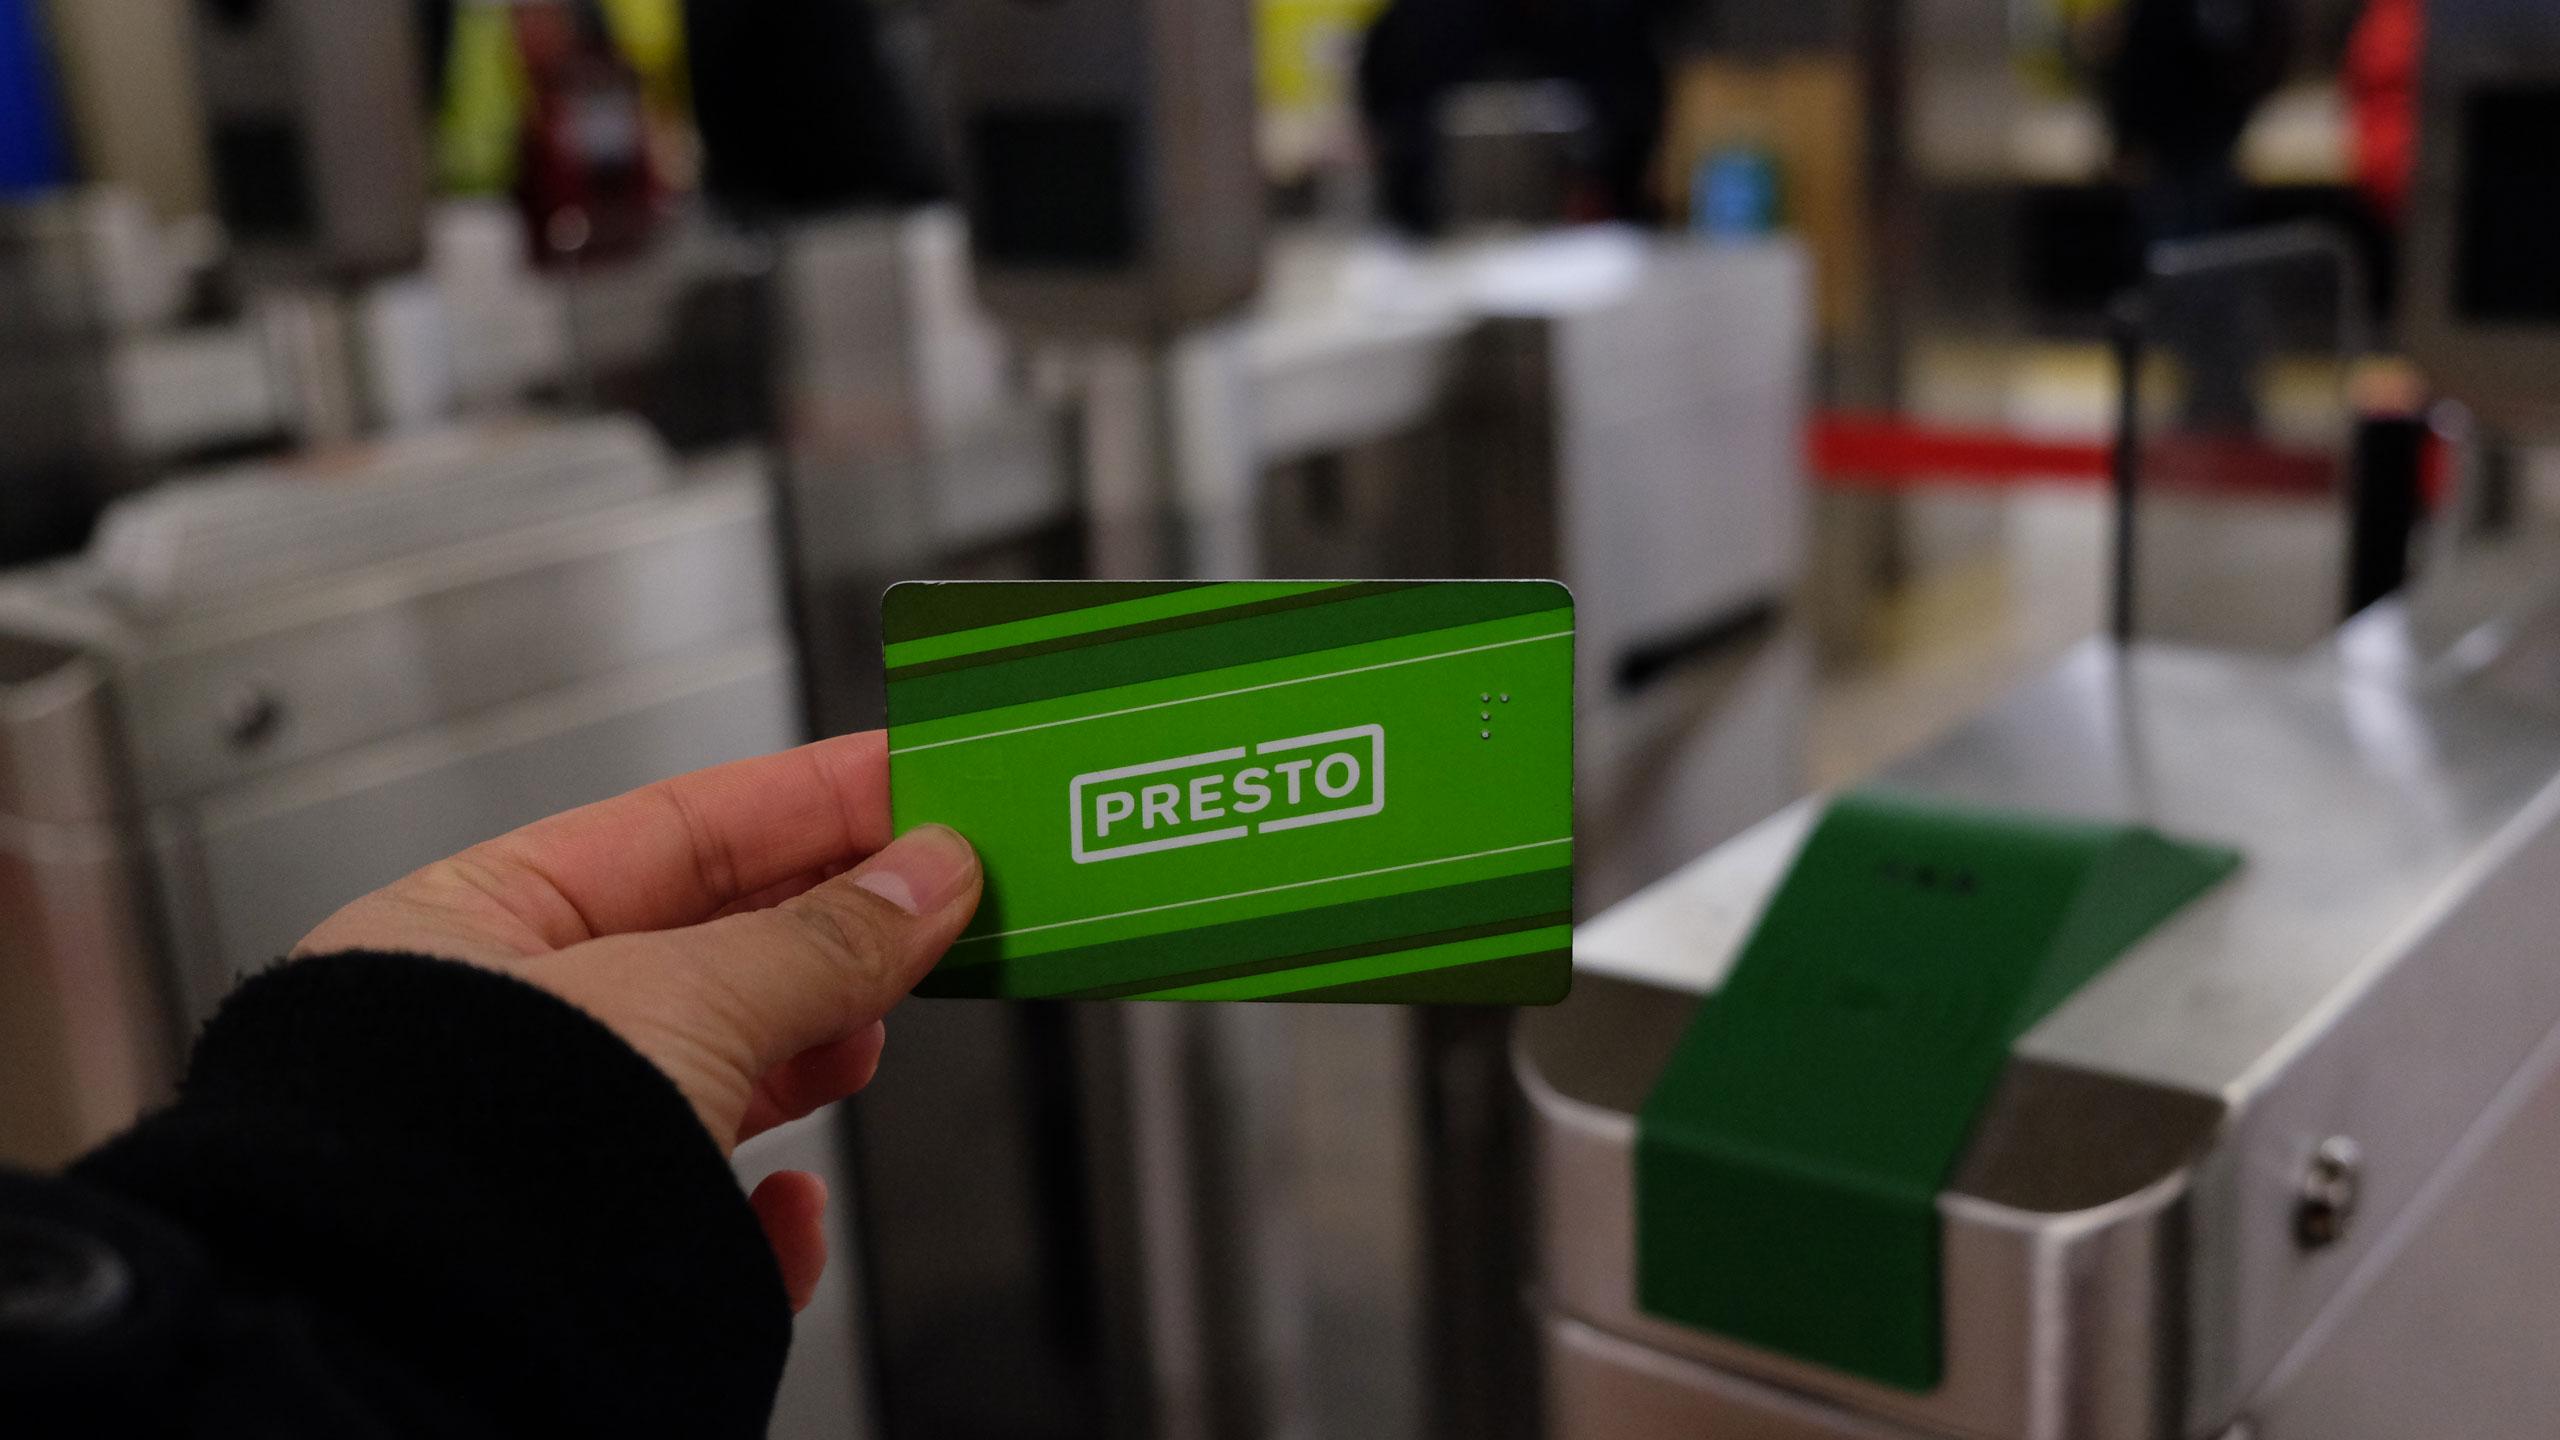 An arm holds a Presto card up in front of a fare gate